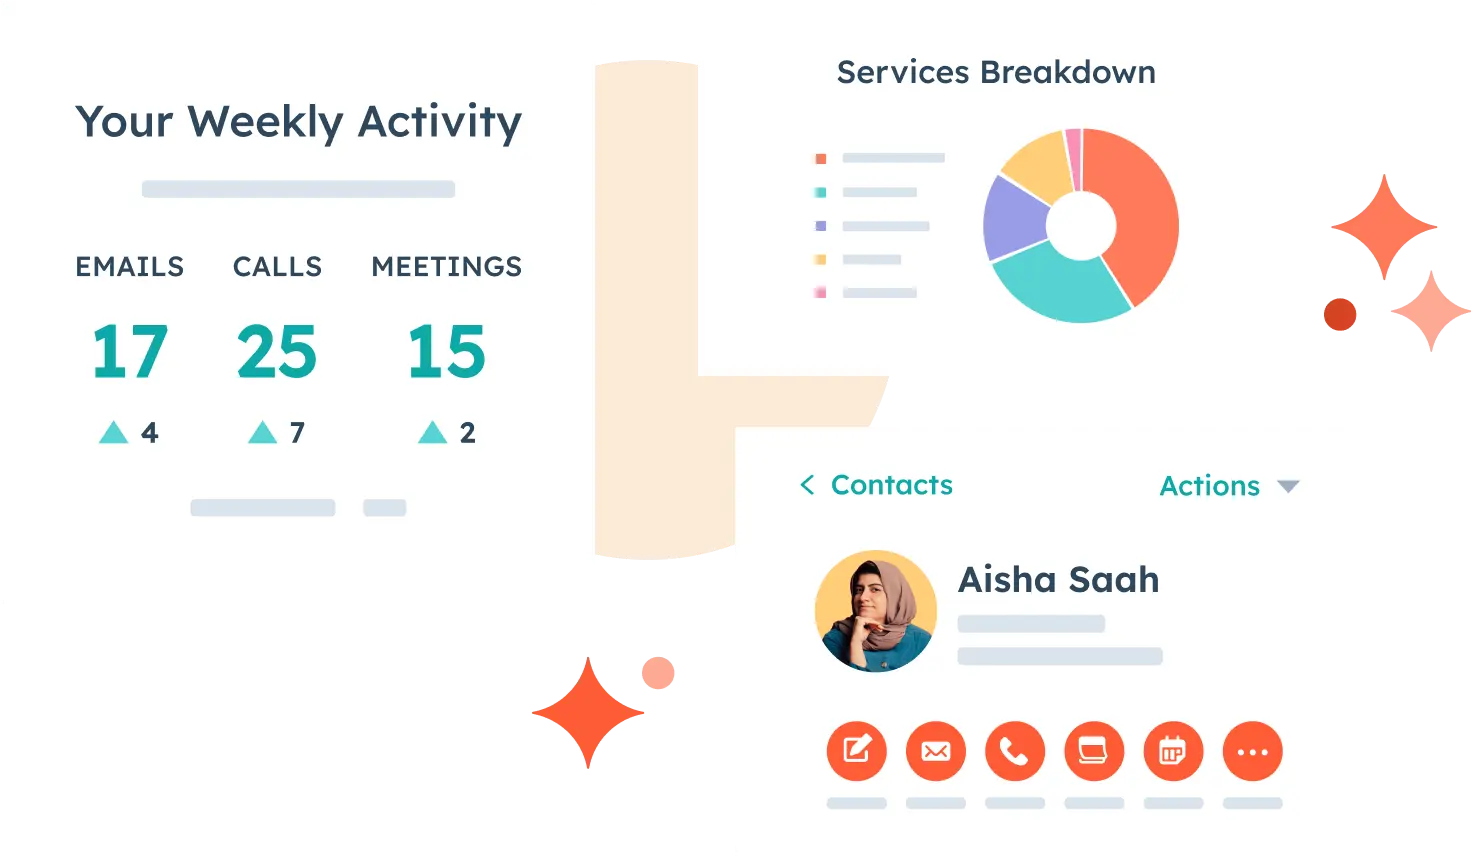 View of a HubSpot user's weekly email, calling, and meeting activity, a contact record, and a customer service report in their HubSpot CRM platform